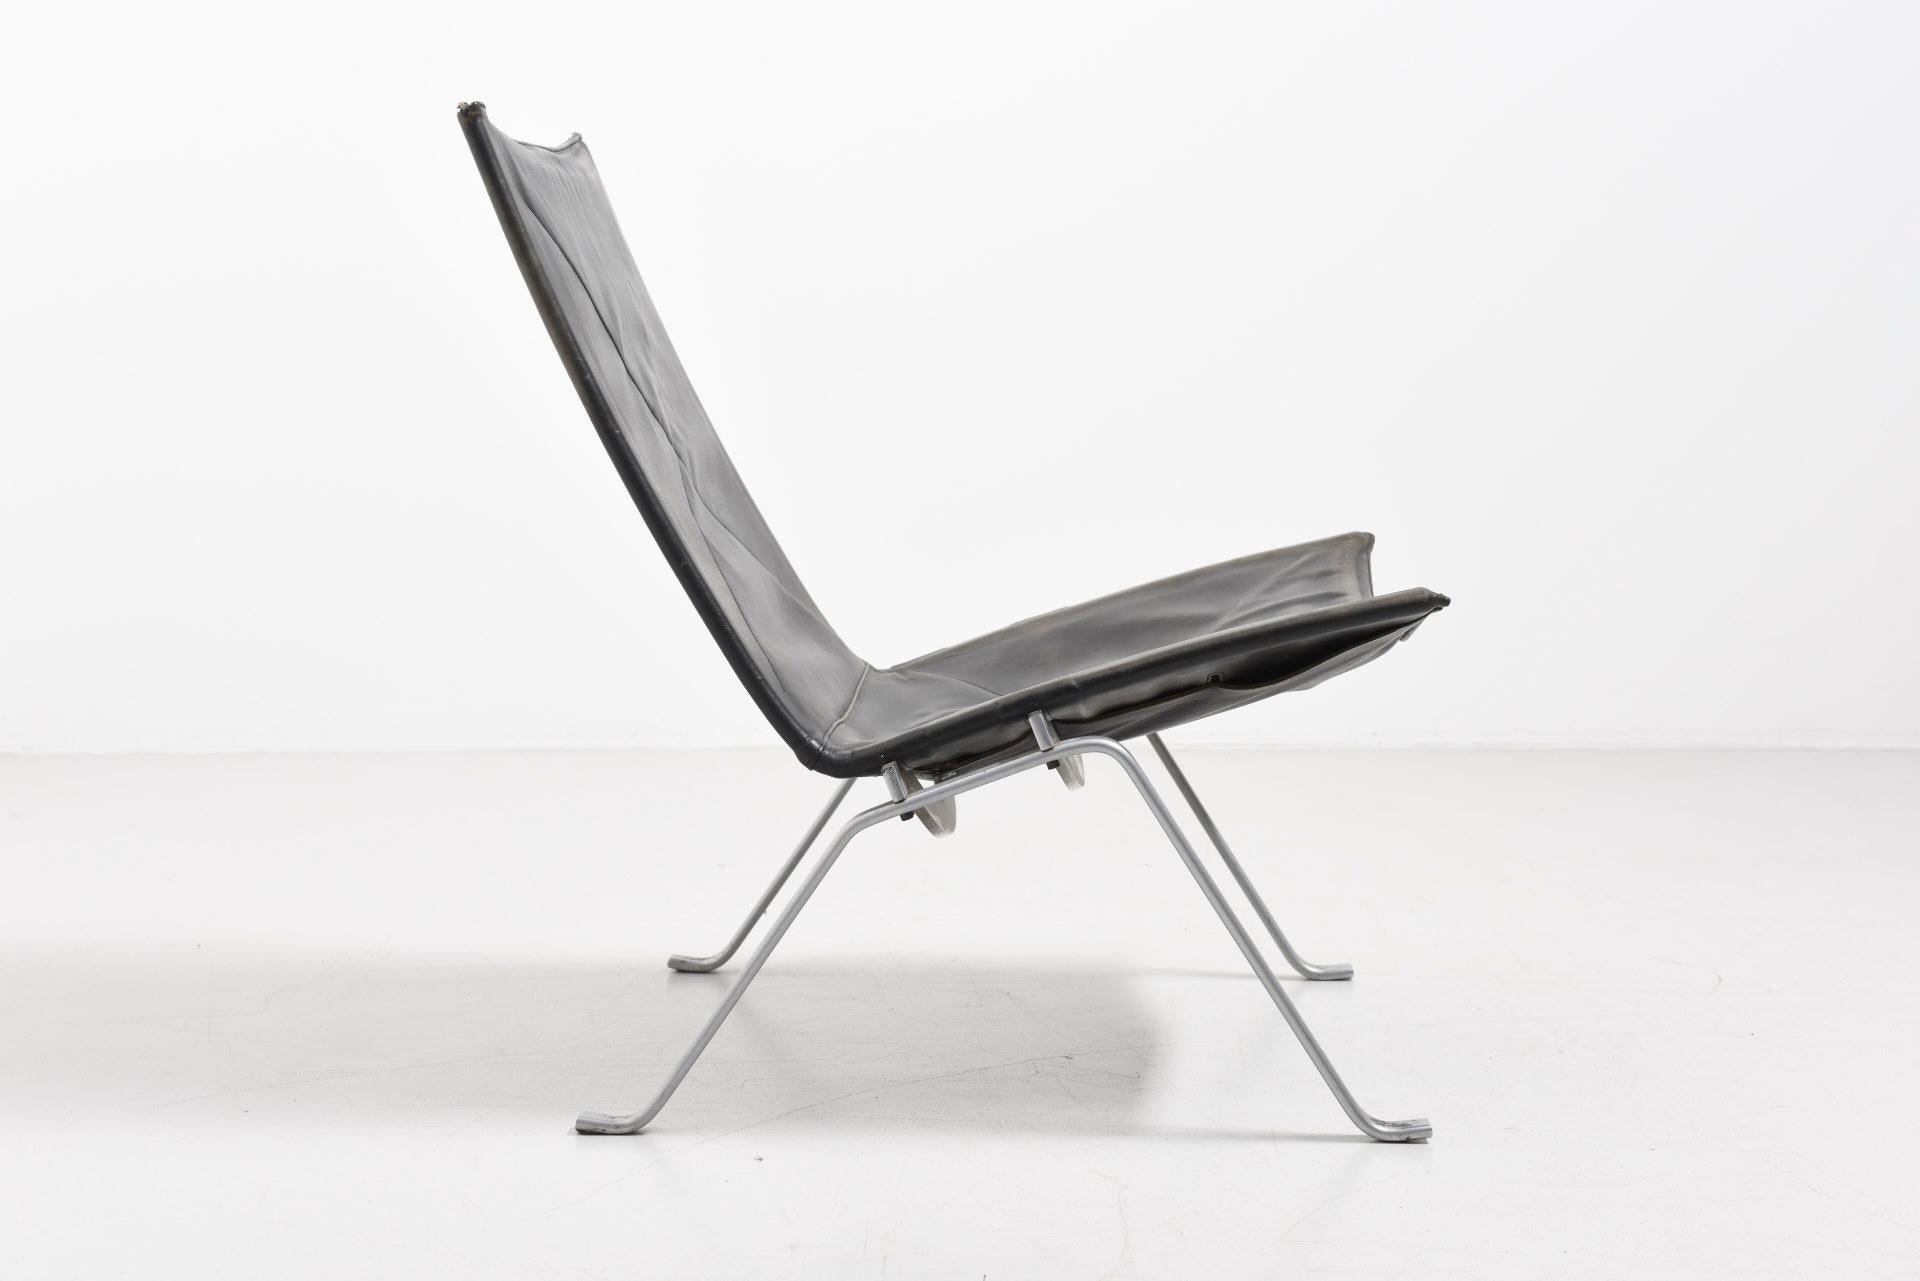 PK 22 easy chair. Design by Poul Kjaerholm in 1955. Stainless steel frame with black leather. Leather is damaged on one corner. Produced by E. Kold Christensen in Denmark.